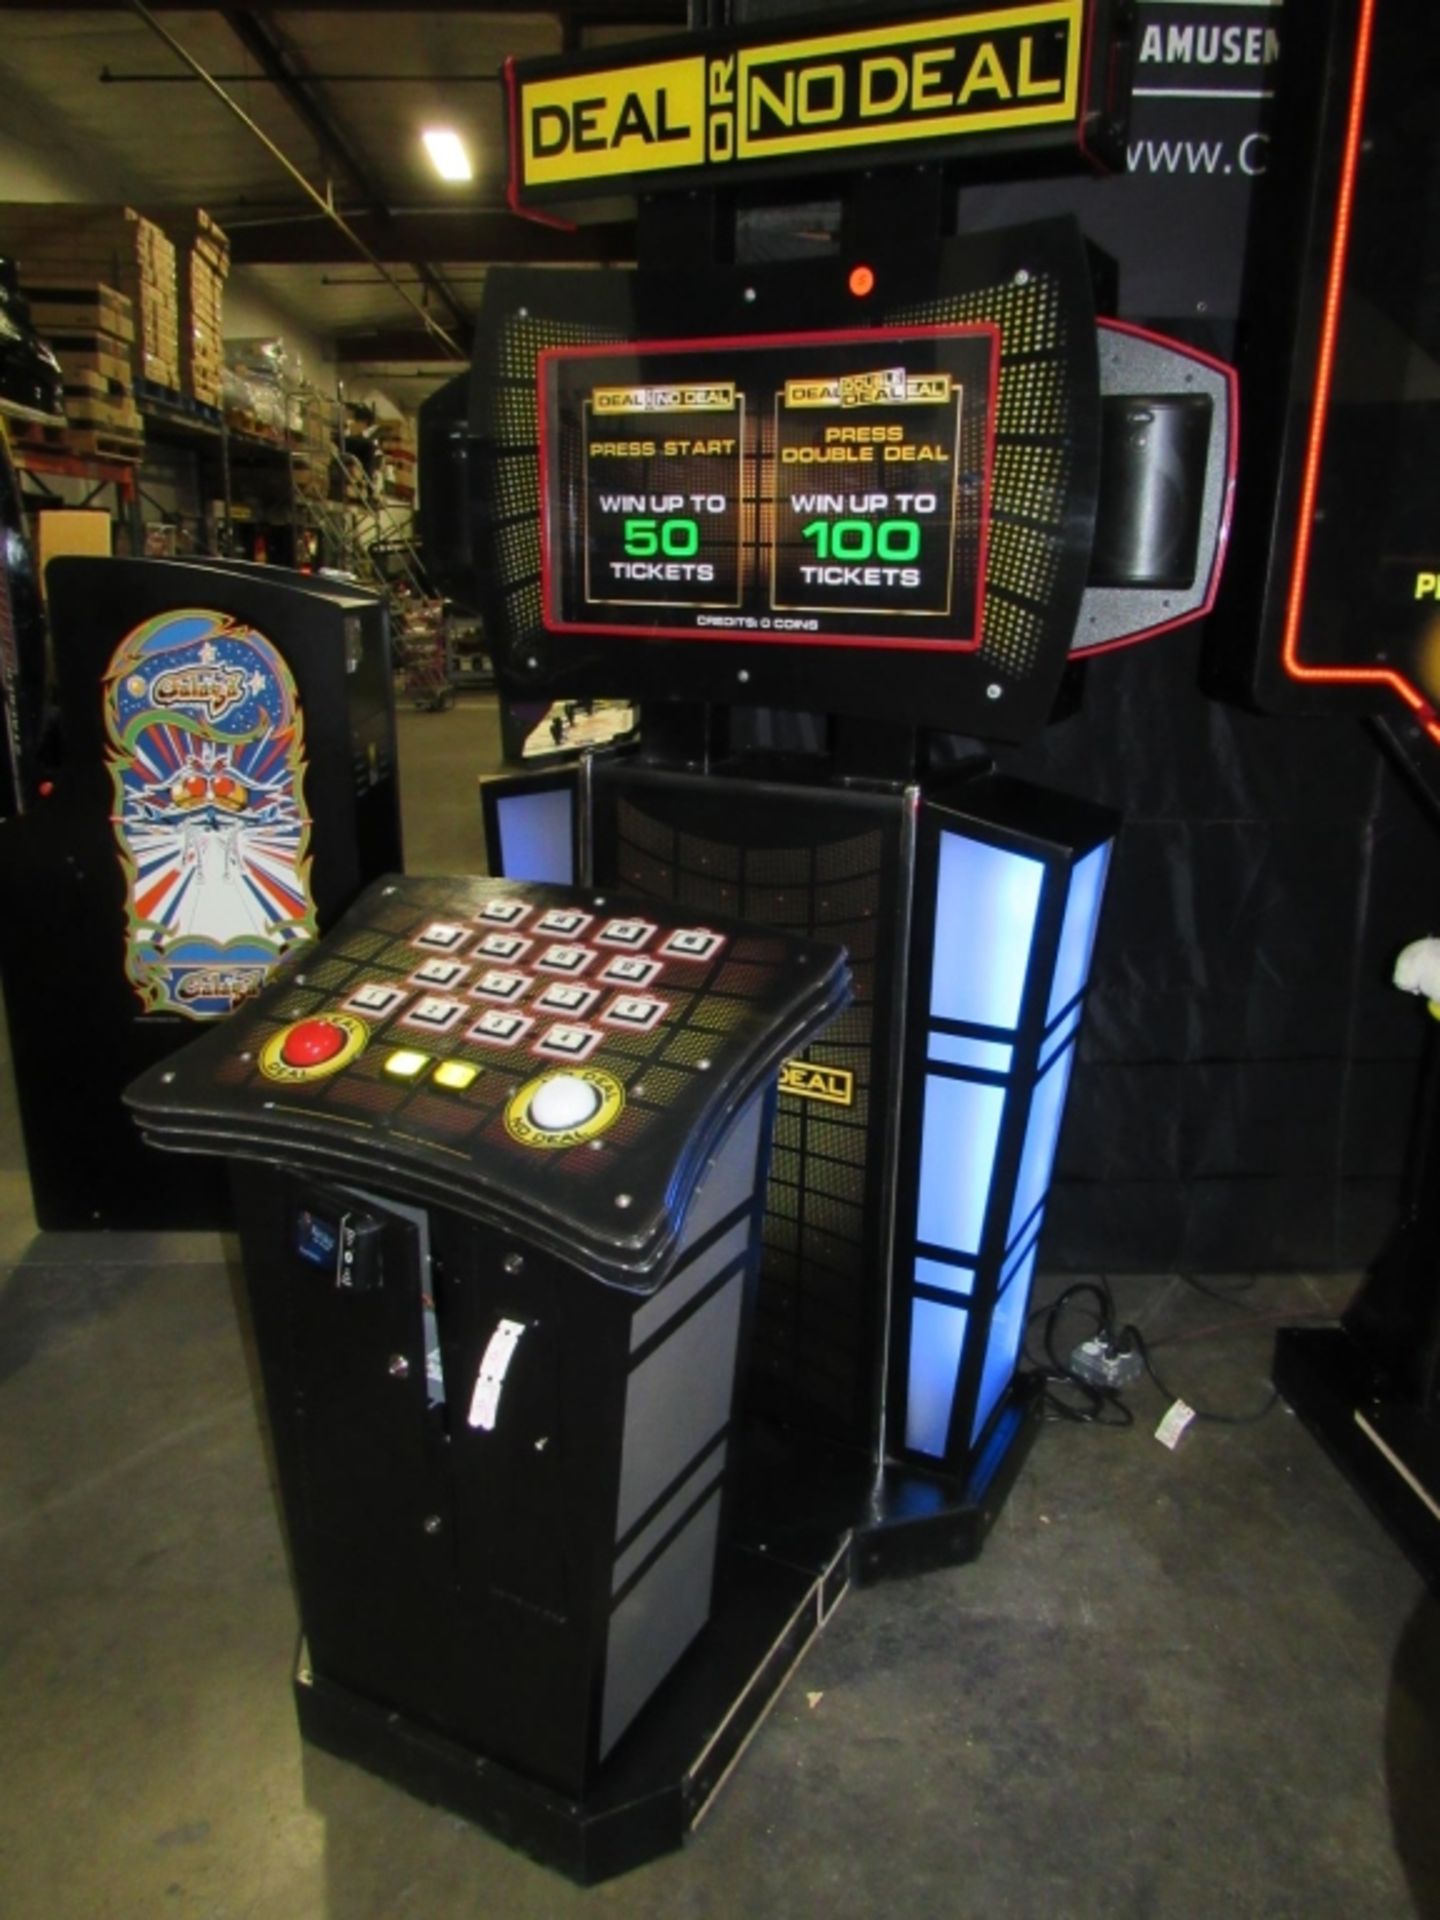 DEAL OR NO DEAL UPRIGHT ARCADE GAME ICE - Image 5 of 5